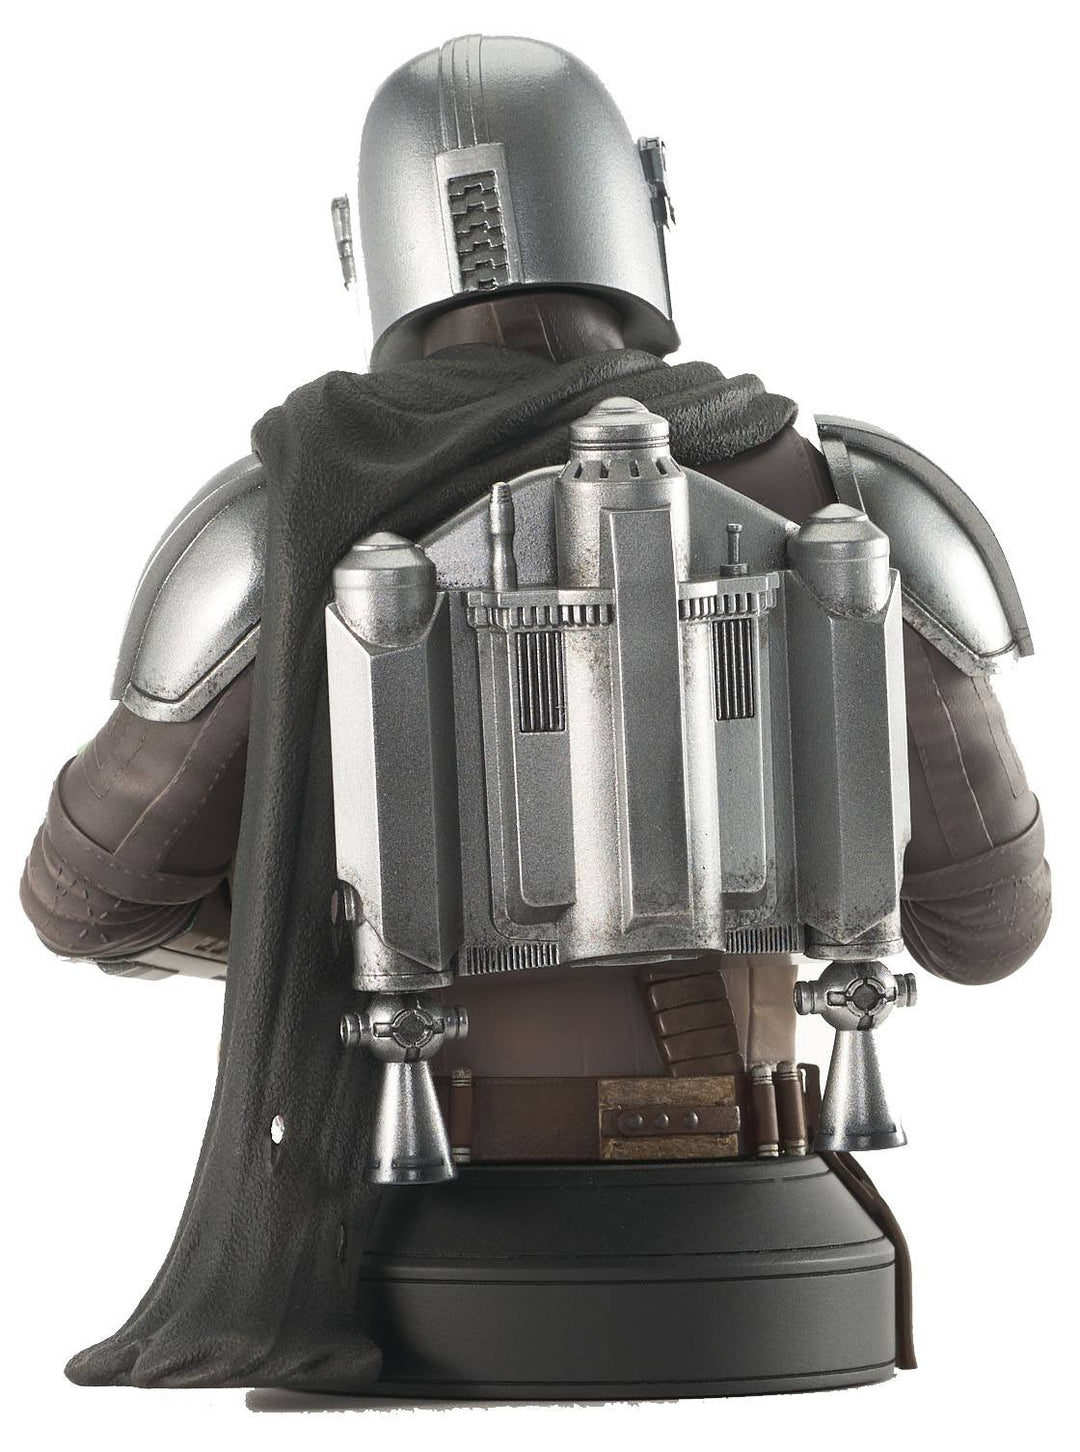 Star Wars The Mandalorian 1/6 Scale Bust The Mandalorian with Grogu 15 cm - Infinity Collectables 